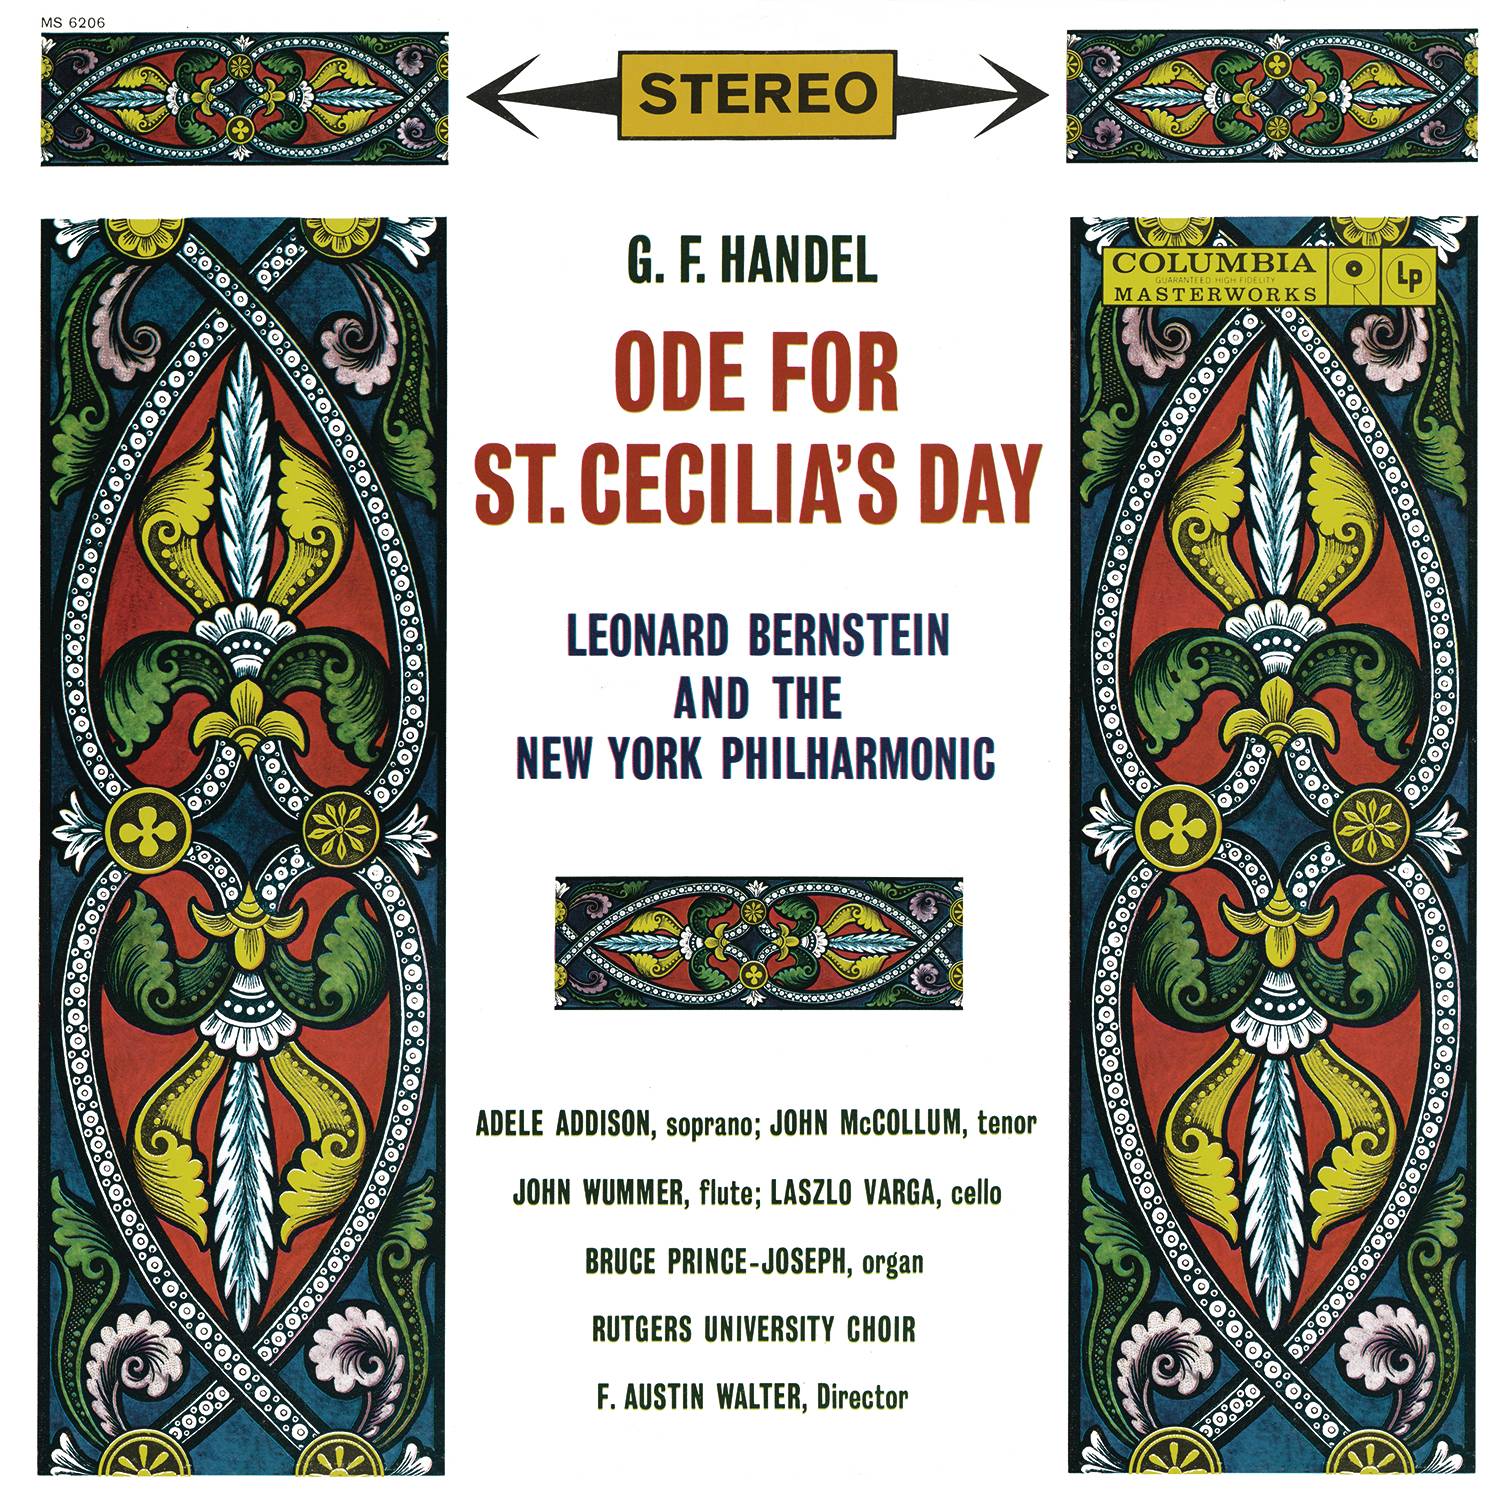 Ode For St. Cecilia's Day, HWV 76:No. 11, As from the pow'r of sacred lays